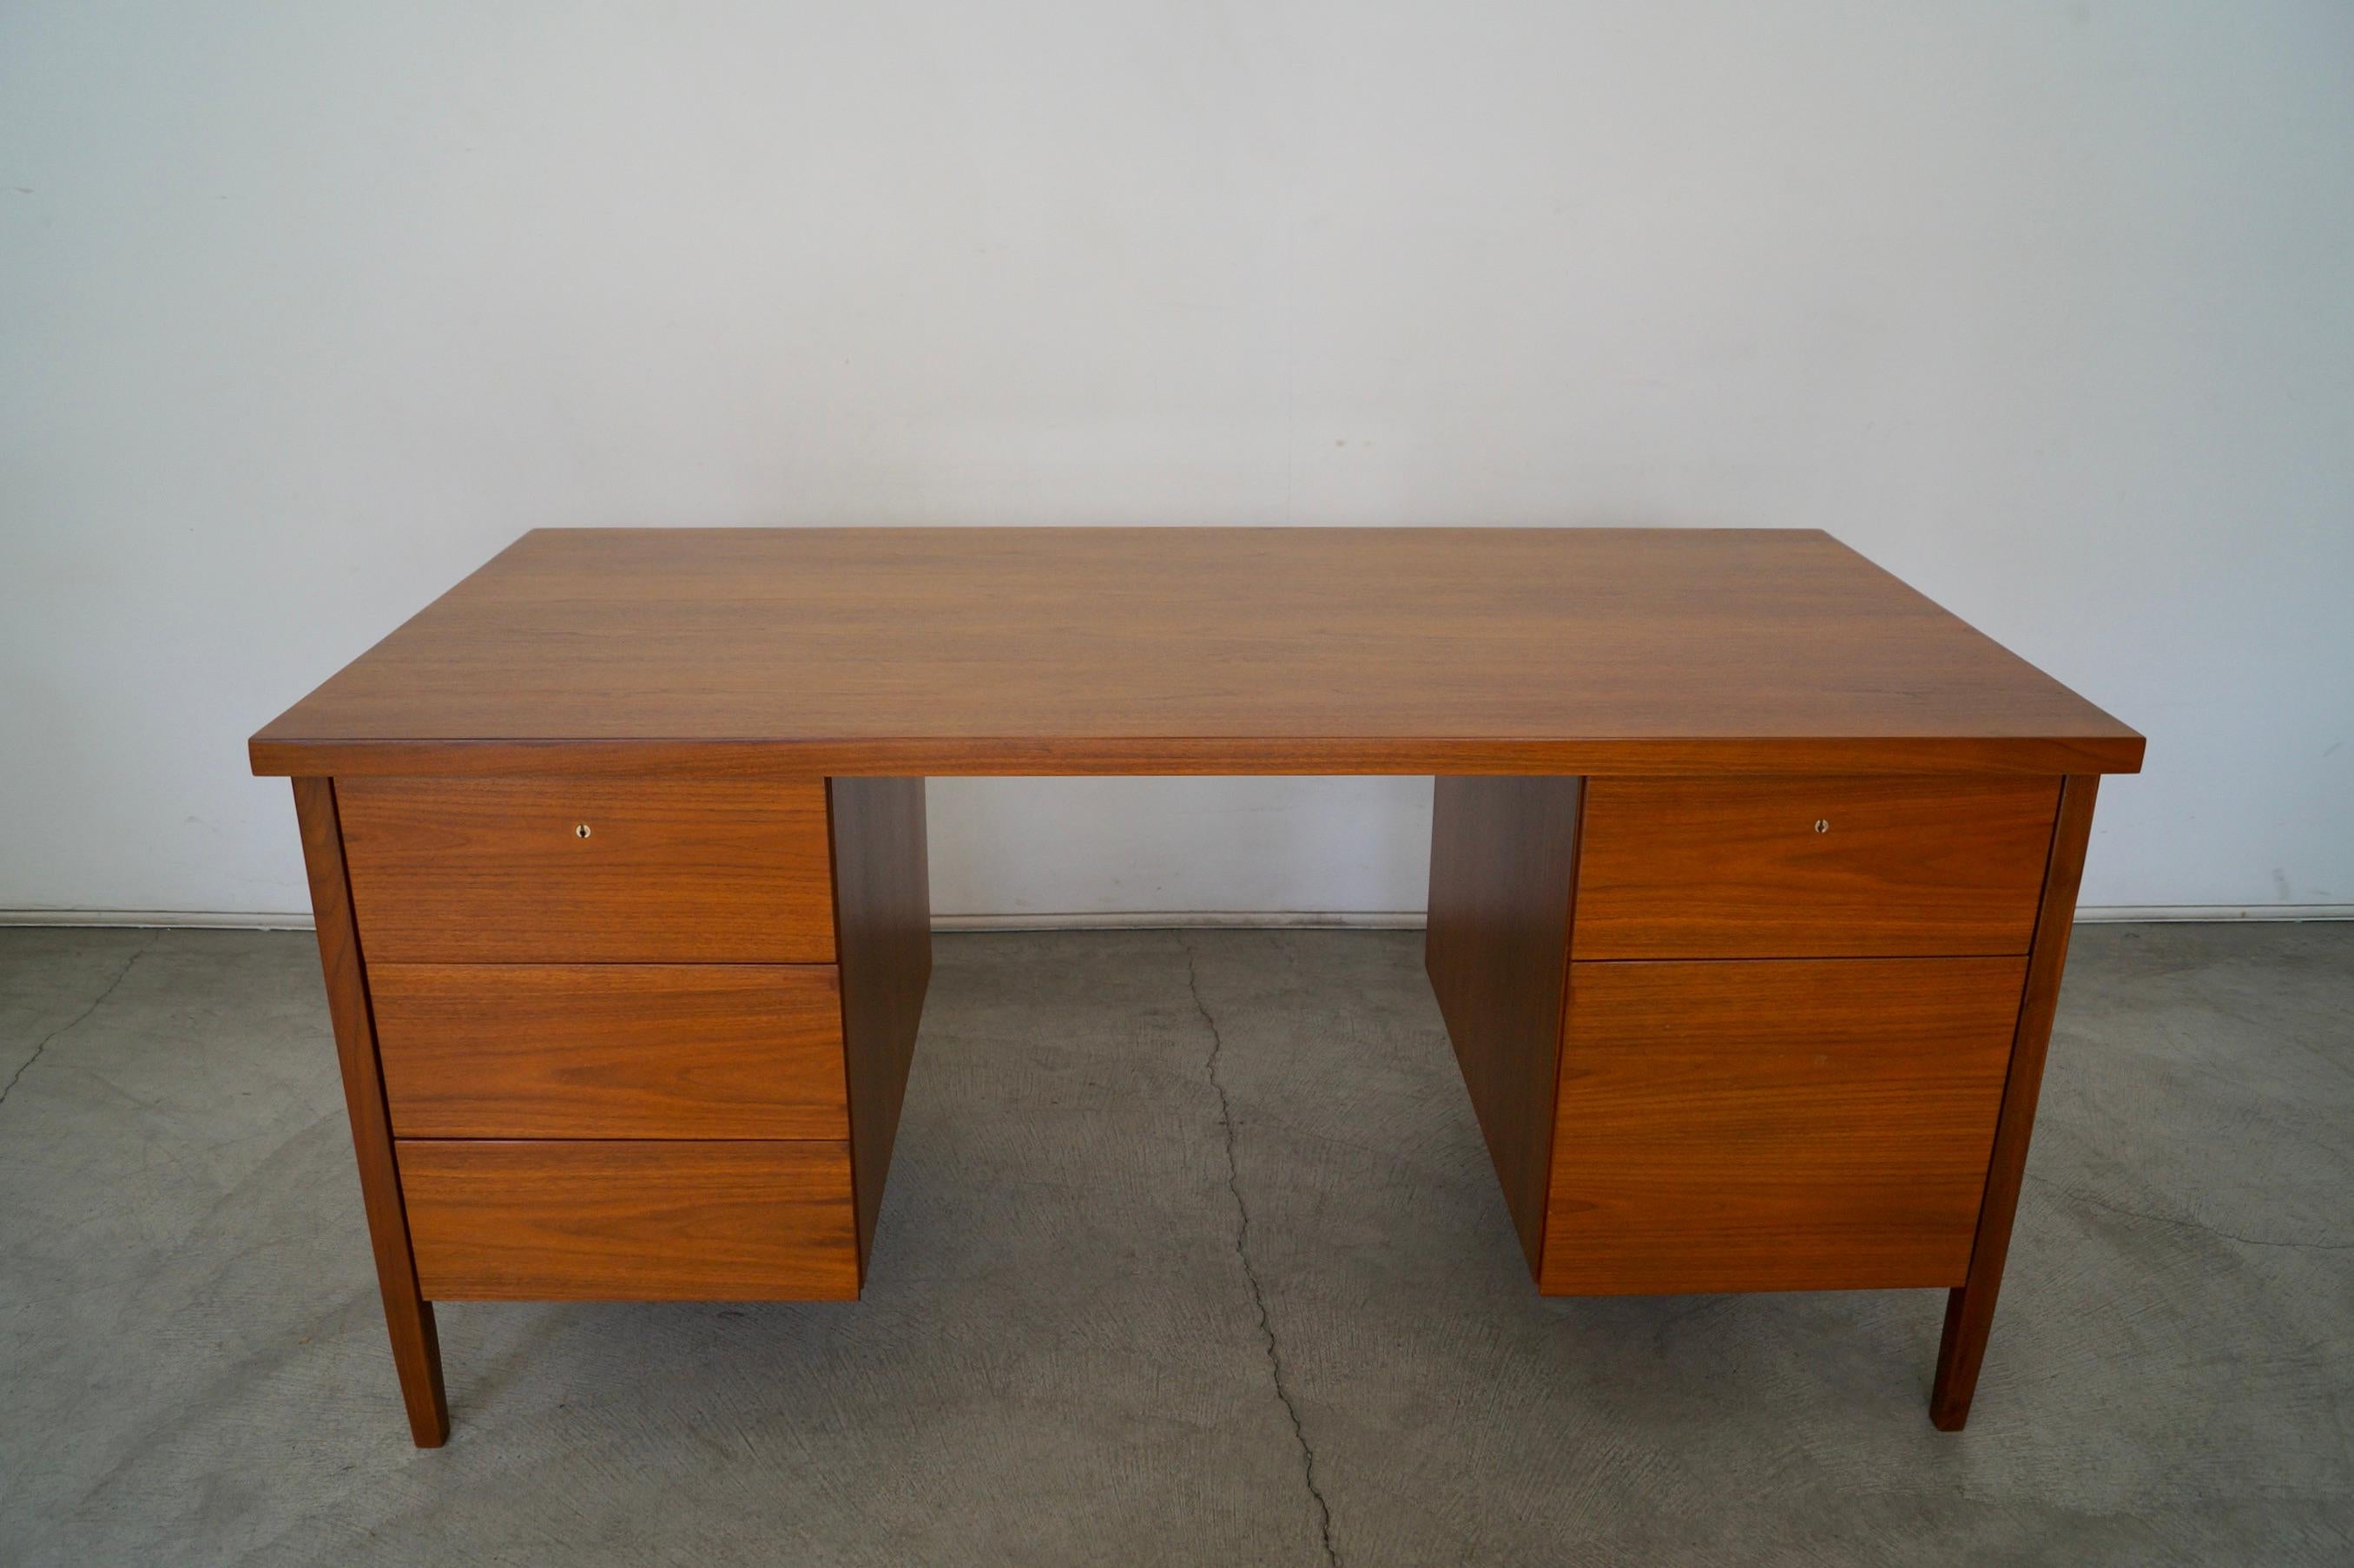 Original vintage Mid-Century Modern executive desk for sale. Designed by Florence Knoll for Knoll, and still has the original vintage 1960s Knoll bowtie label. It has a Classic and clean design, and is made of walnut. It has been professionally